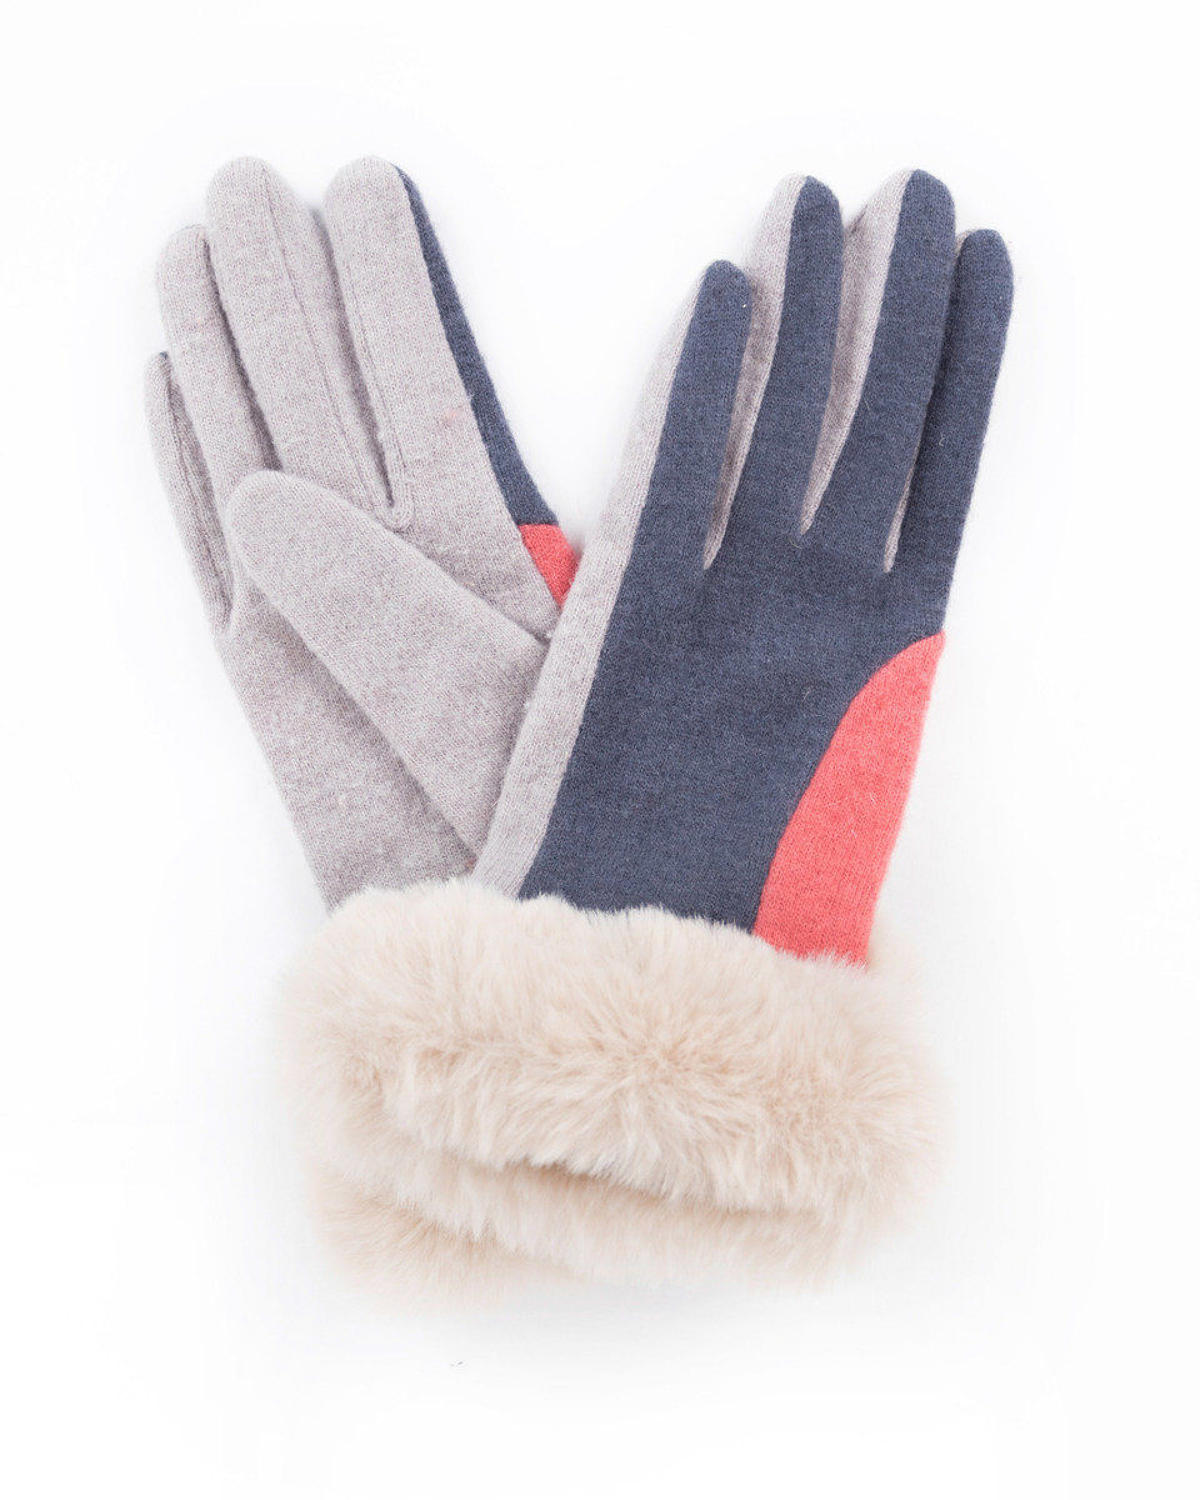 Powder - Alexandra wool gloves in Coral mix - One size